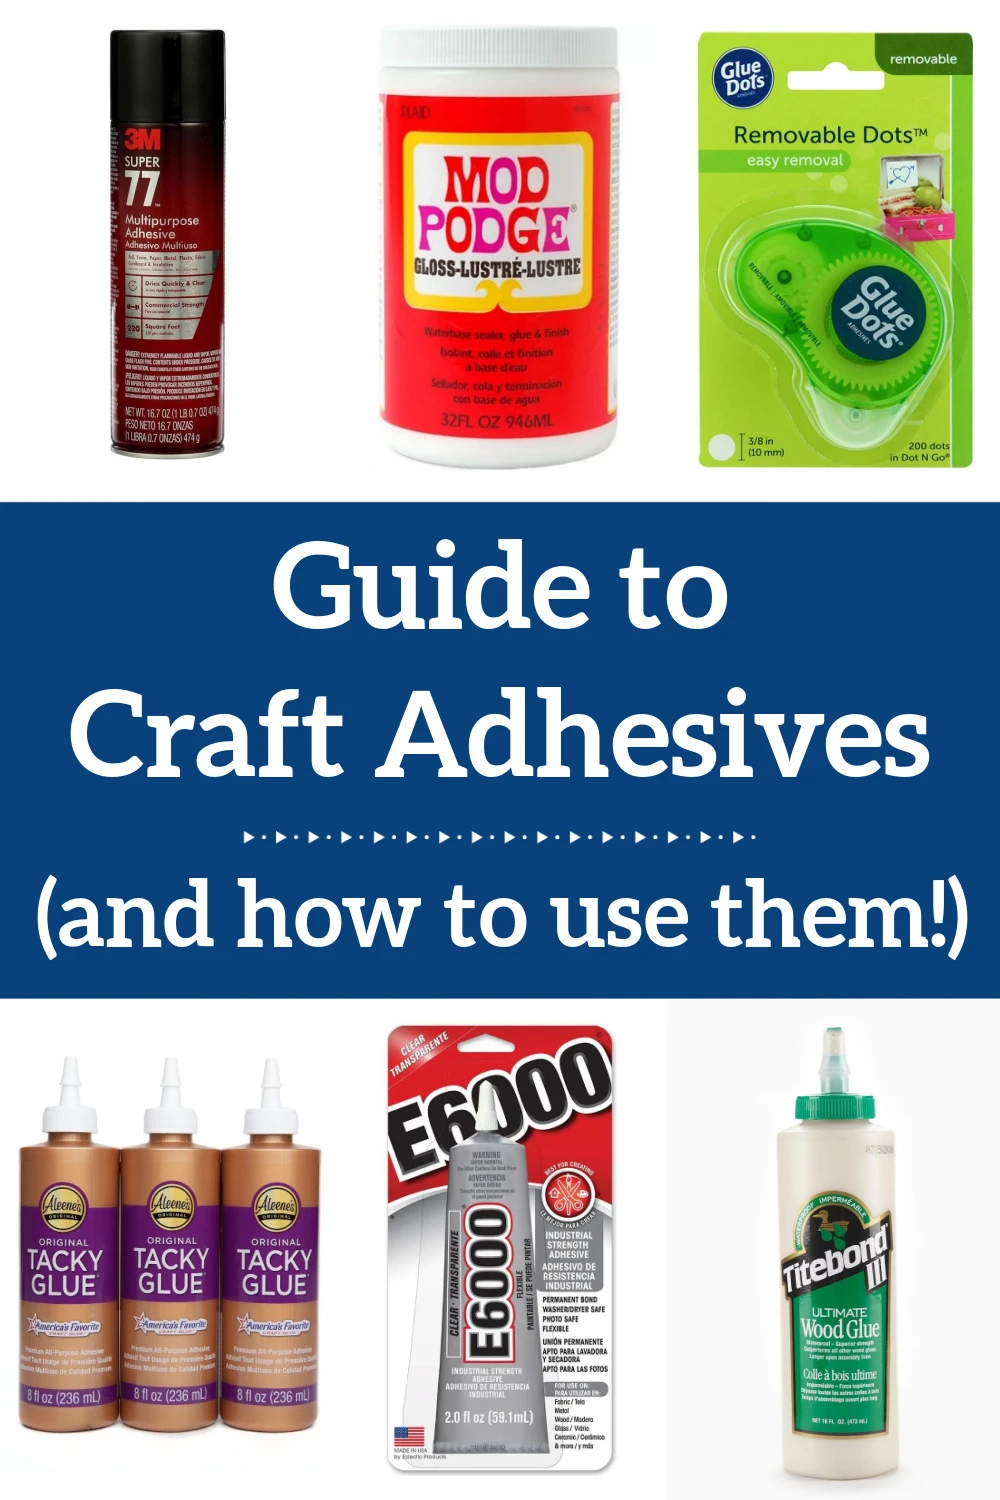 How to Choose the Best Glue for Your Craft Projects - Crafts by Amanda